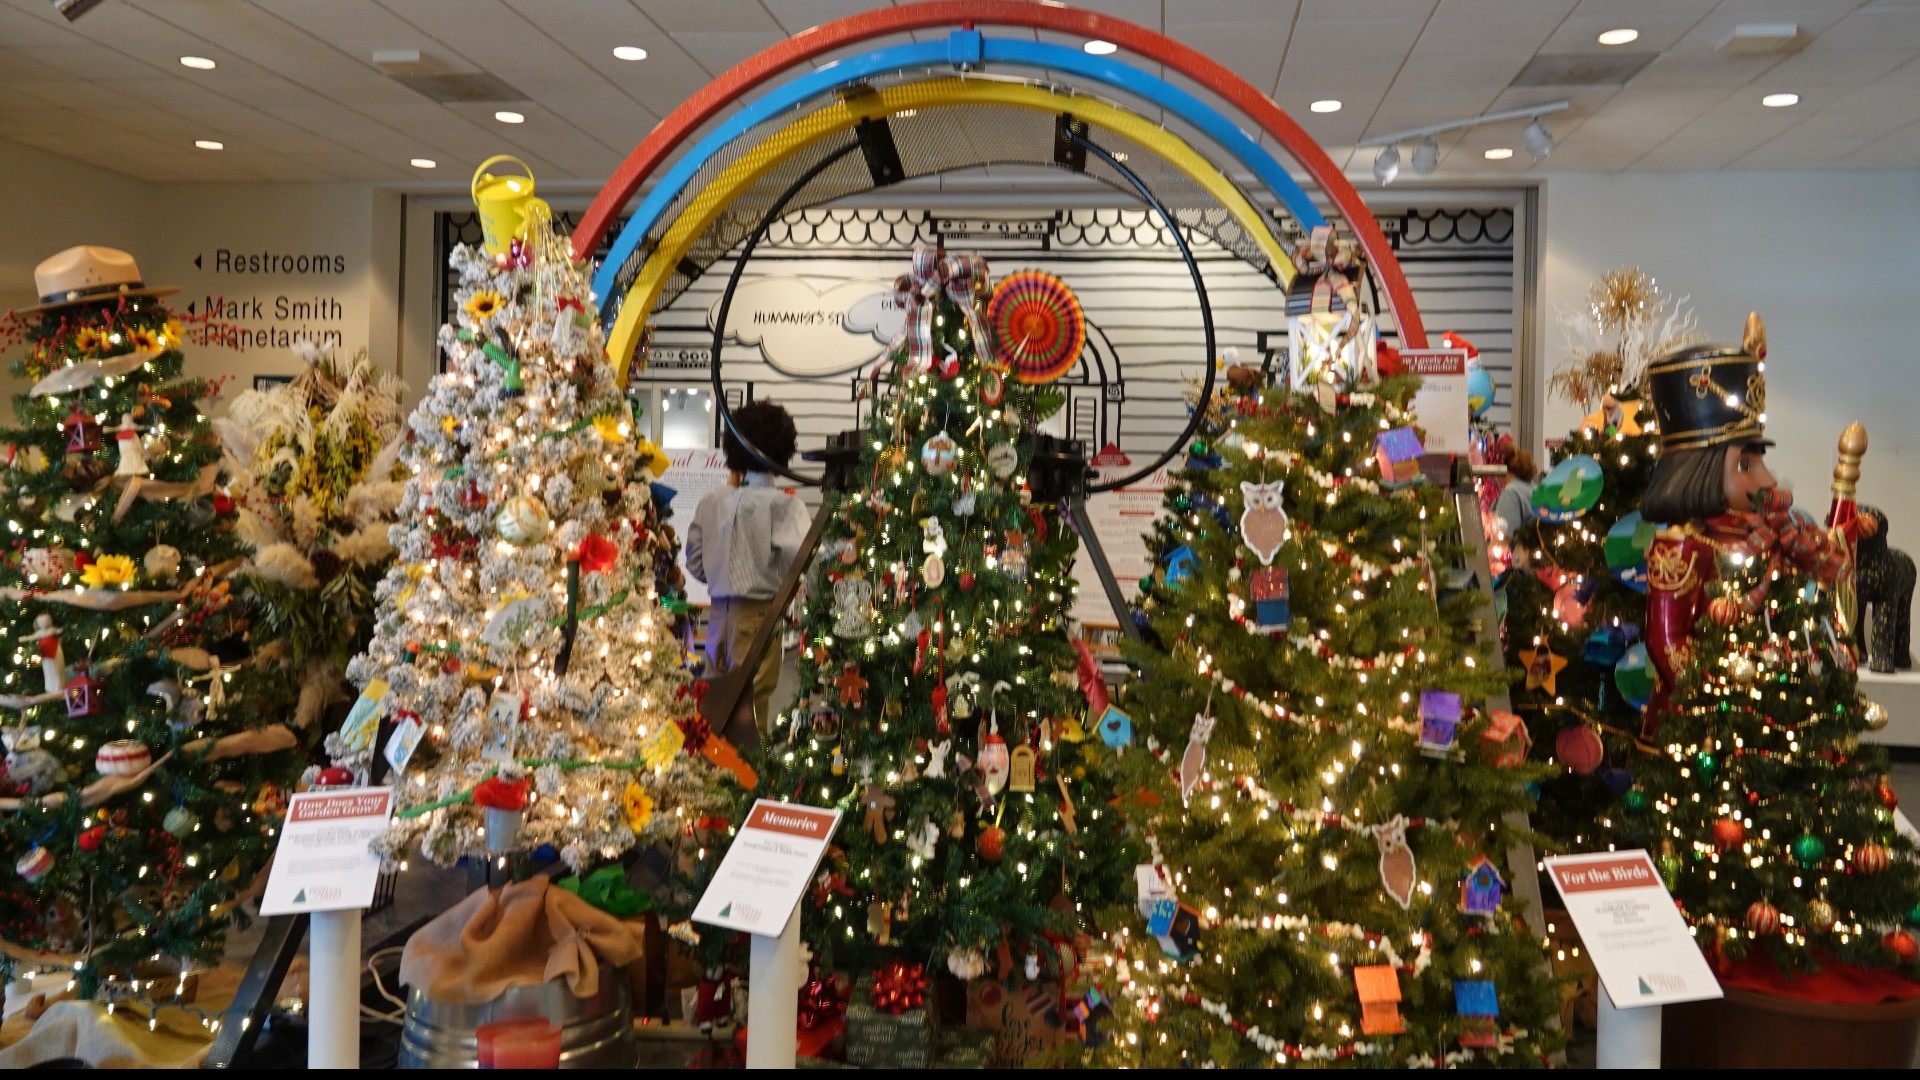 The exhibit features over 40 trees decorated by schools and various organizations across Central Georgia.